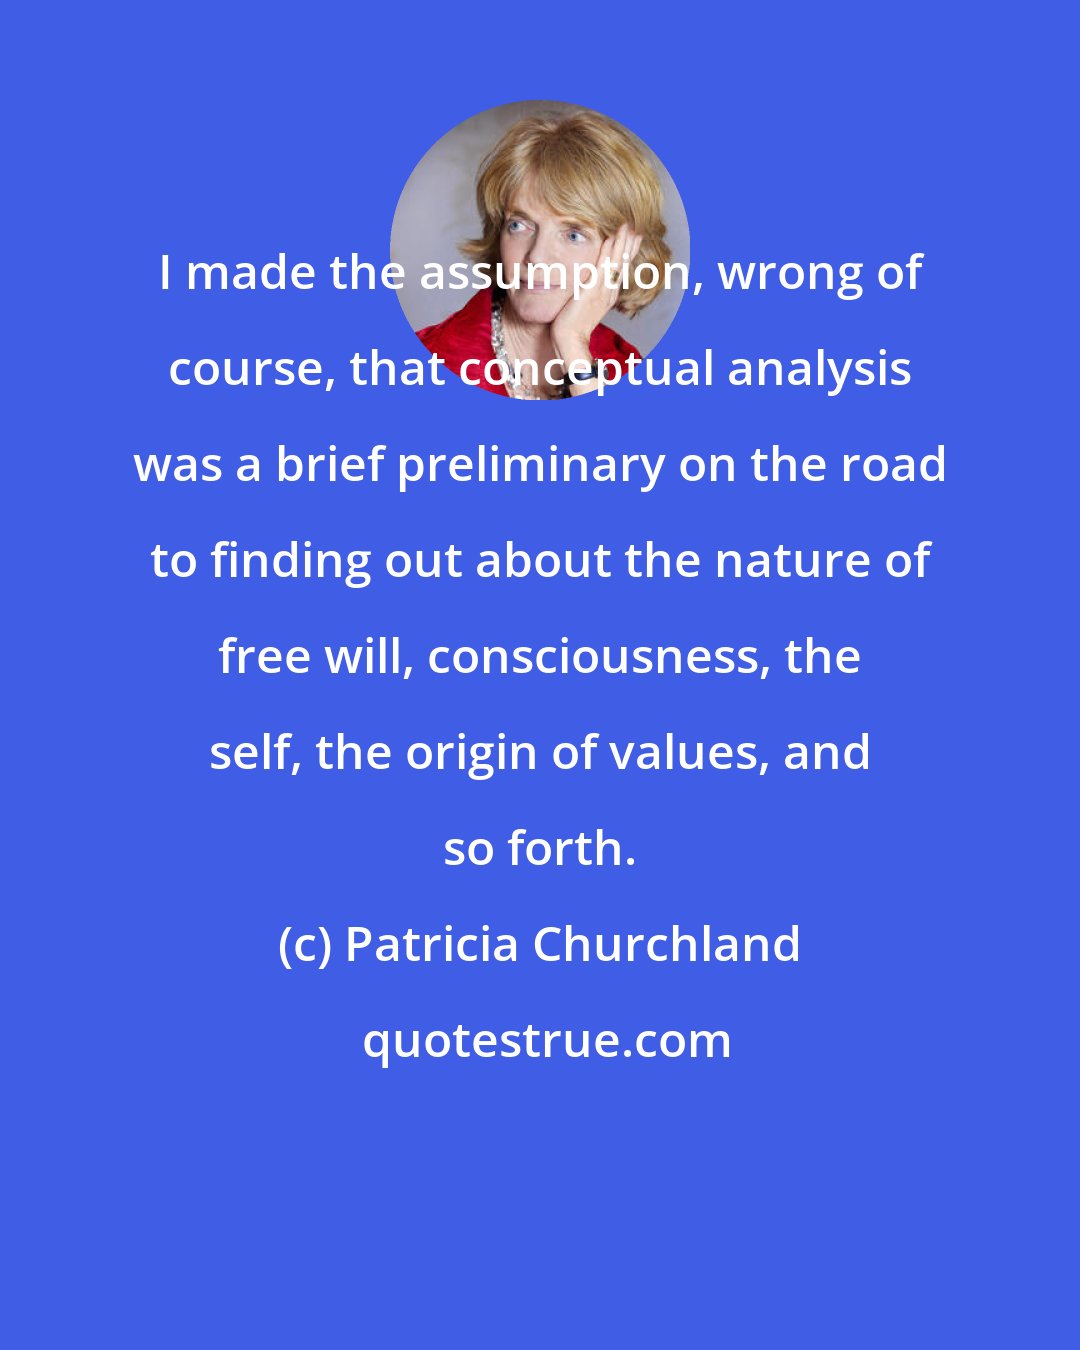 Patricia Churchland: I made the assumption, wrong of course, that conceptual analysis was a brief preliminary on the road to finding out about the nature of free will, consciousness, the self, the origin of values, and so forth.